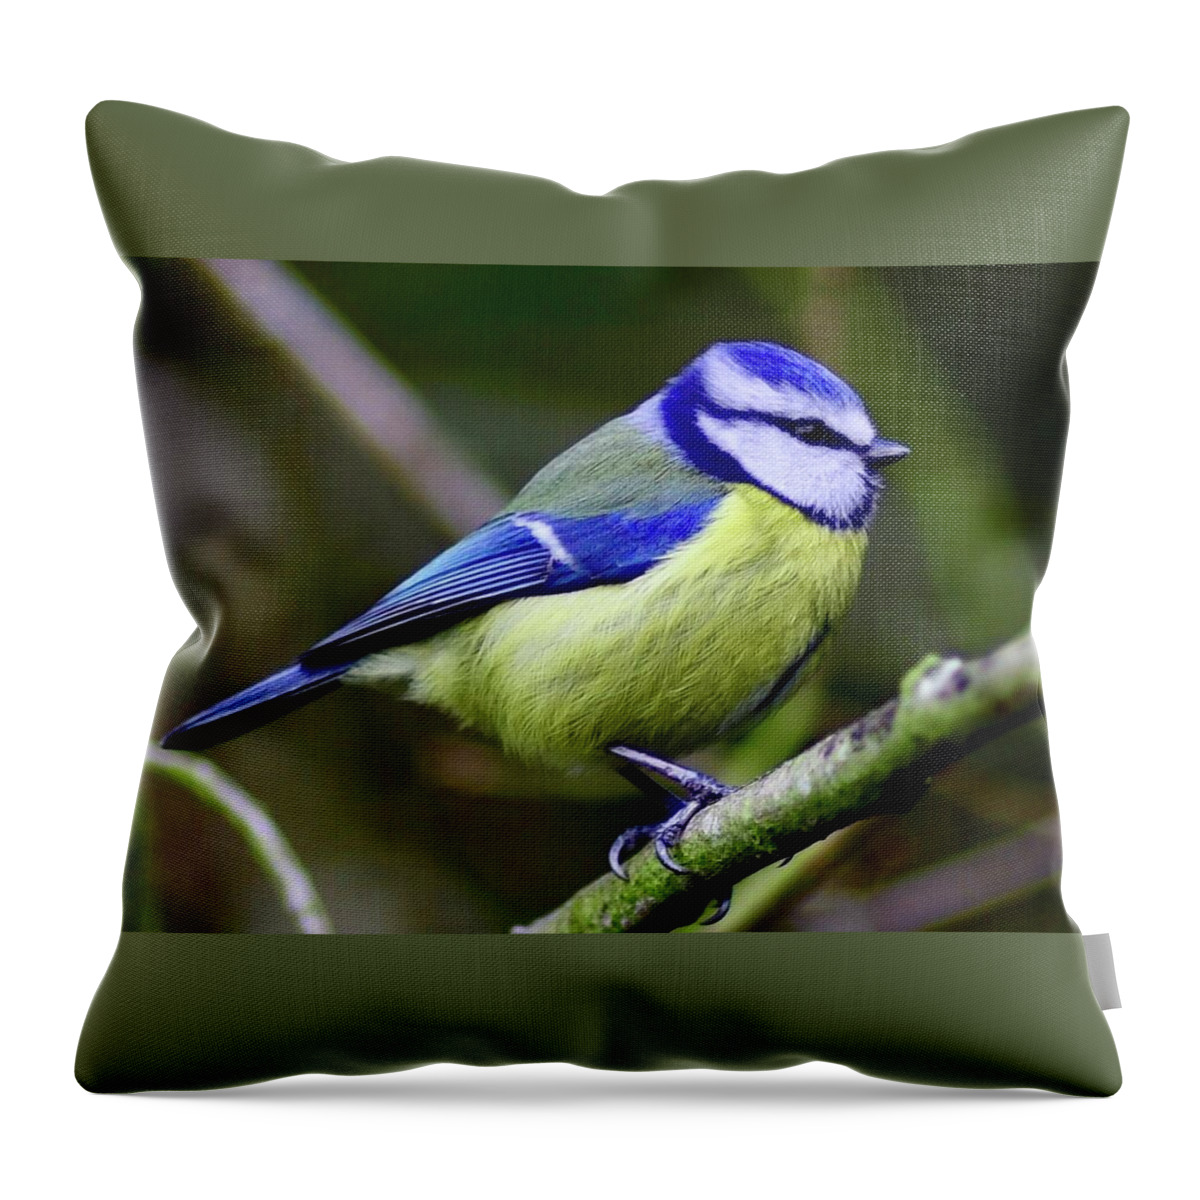 Blue Tit Throw Pillow featuring the photograph Blue Tit by Neil R Finlay